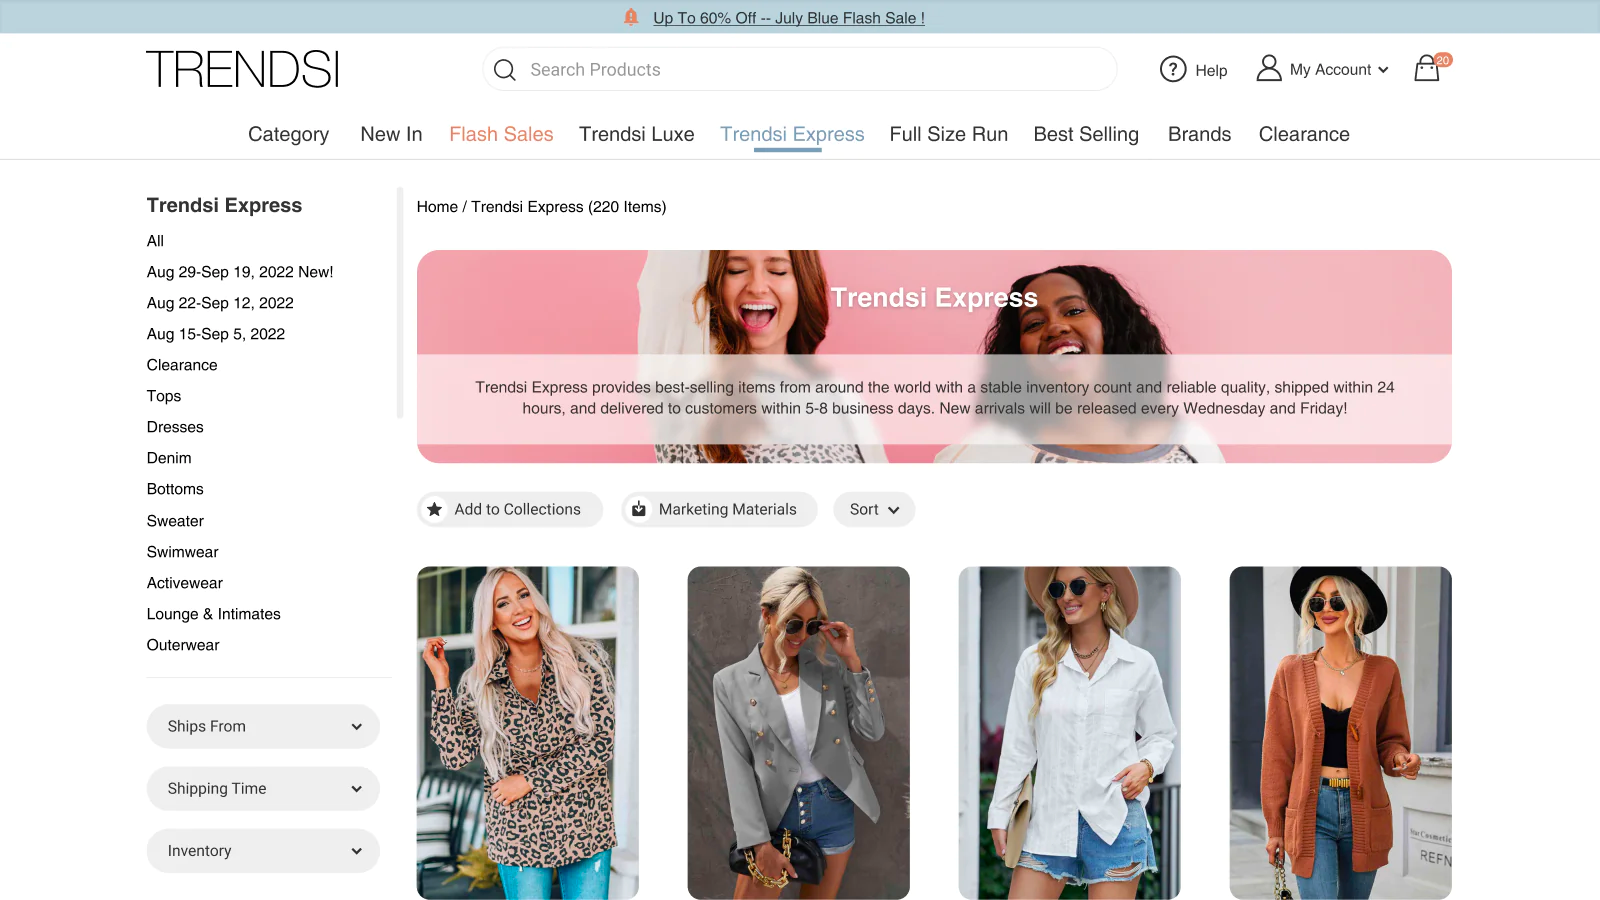 Dropshipping product page with images of clothing models and a sidebar with product filters.